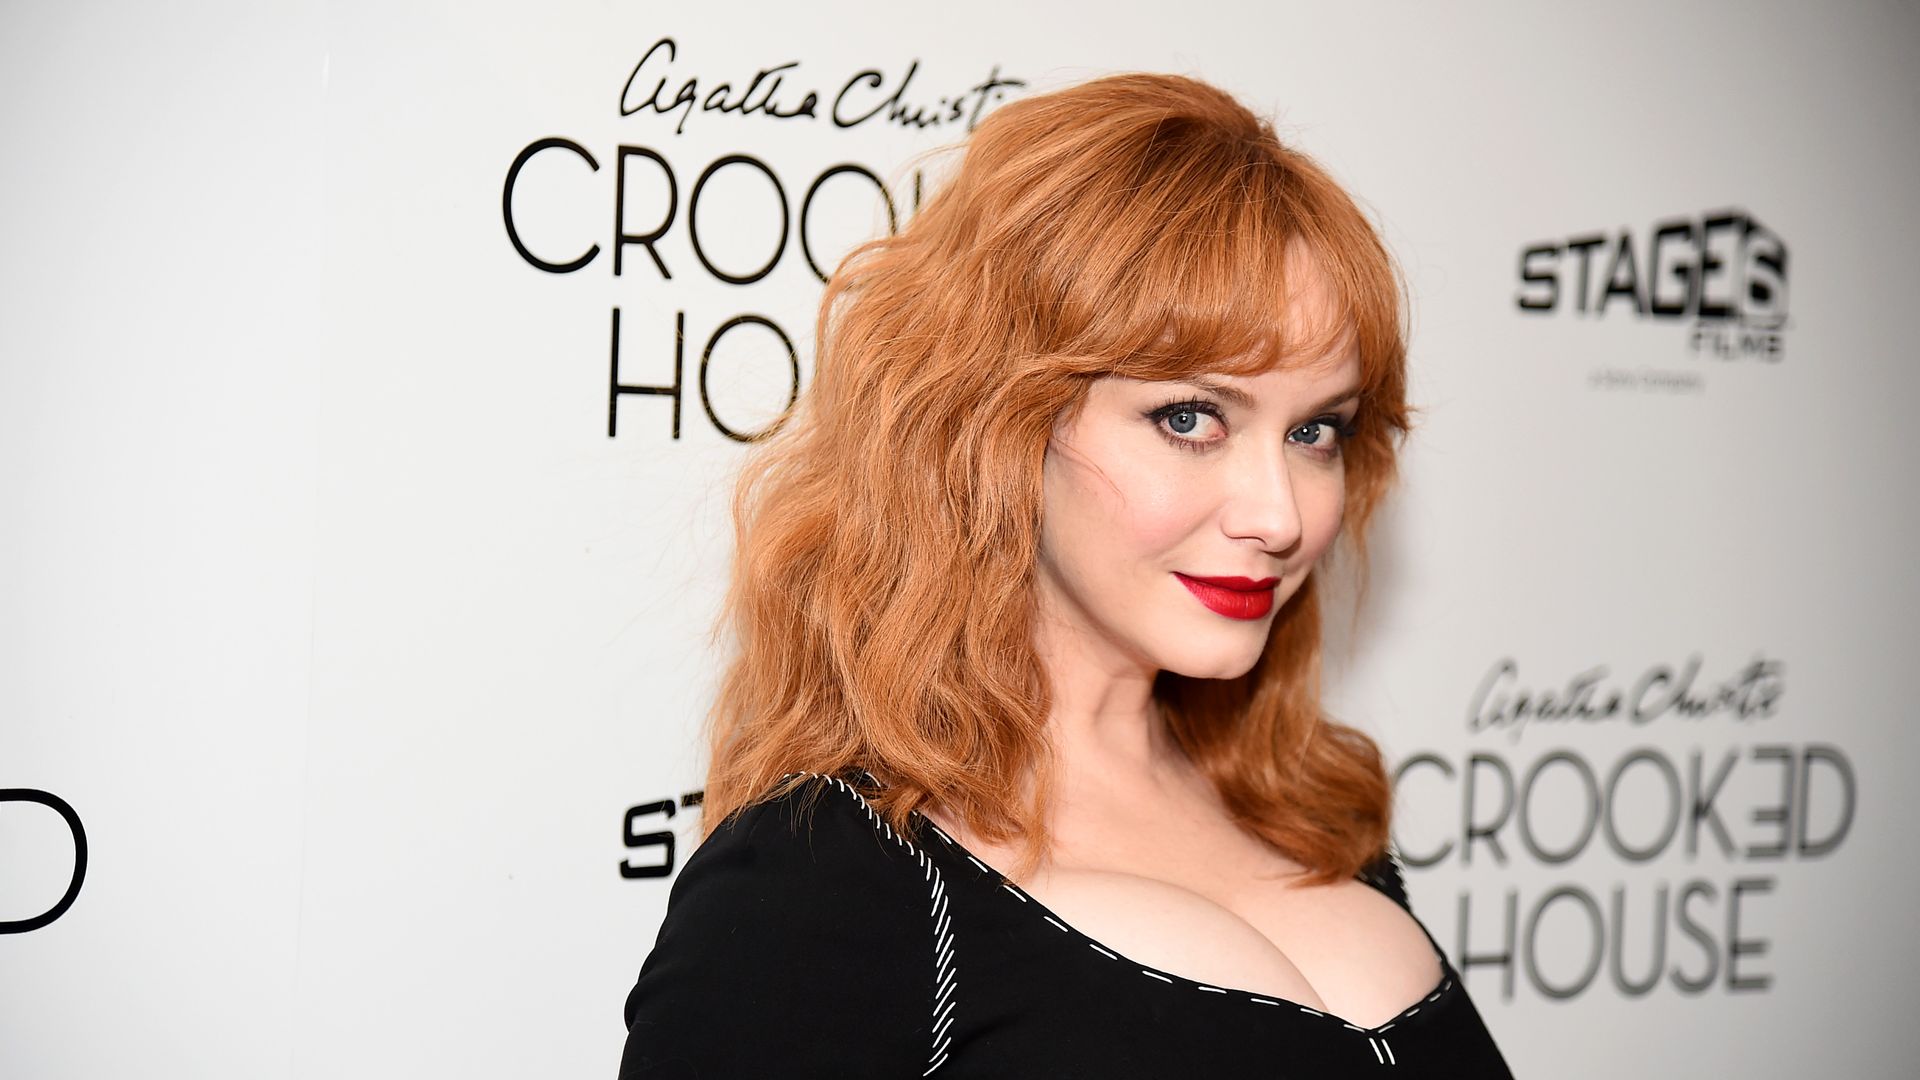 Christina Hendricks attends the "Crooked House" New York Premiere